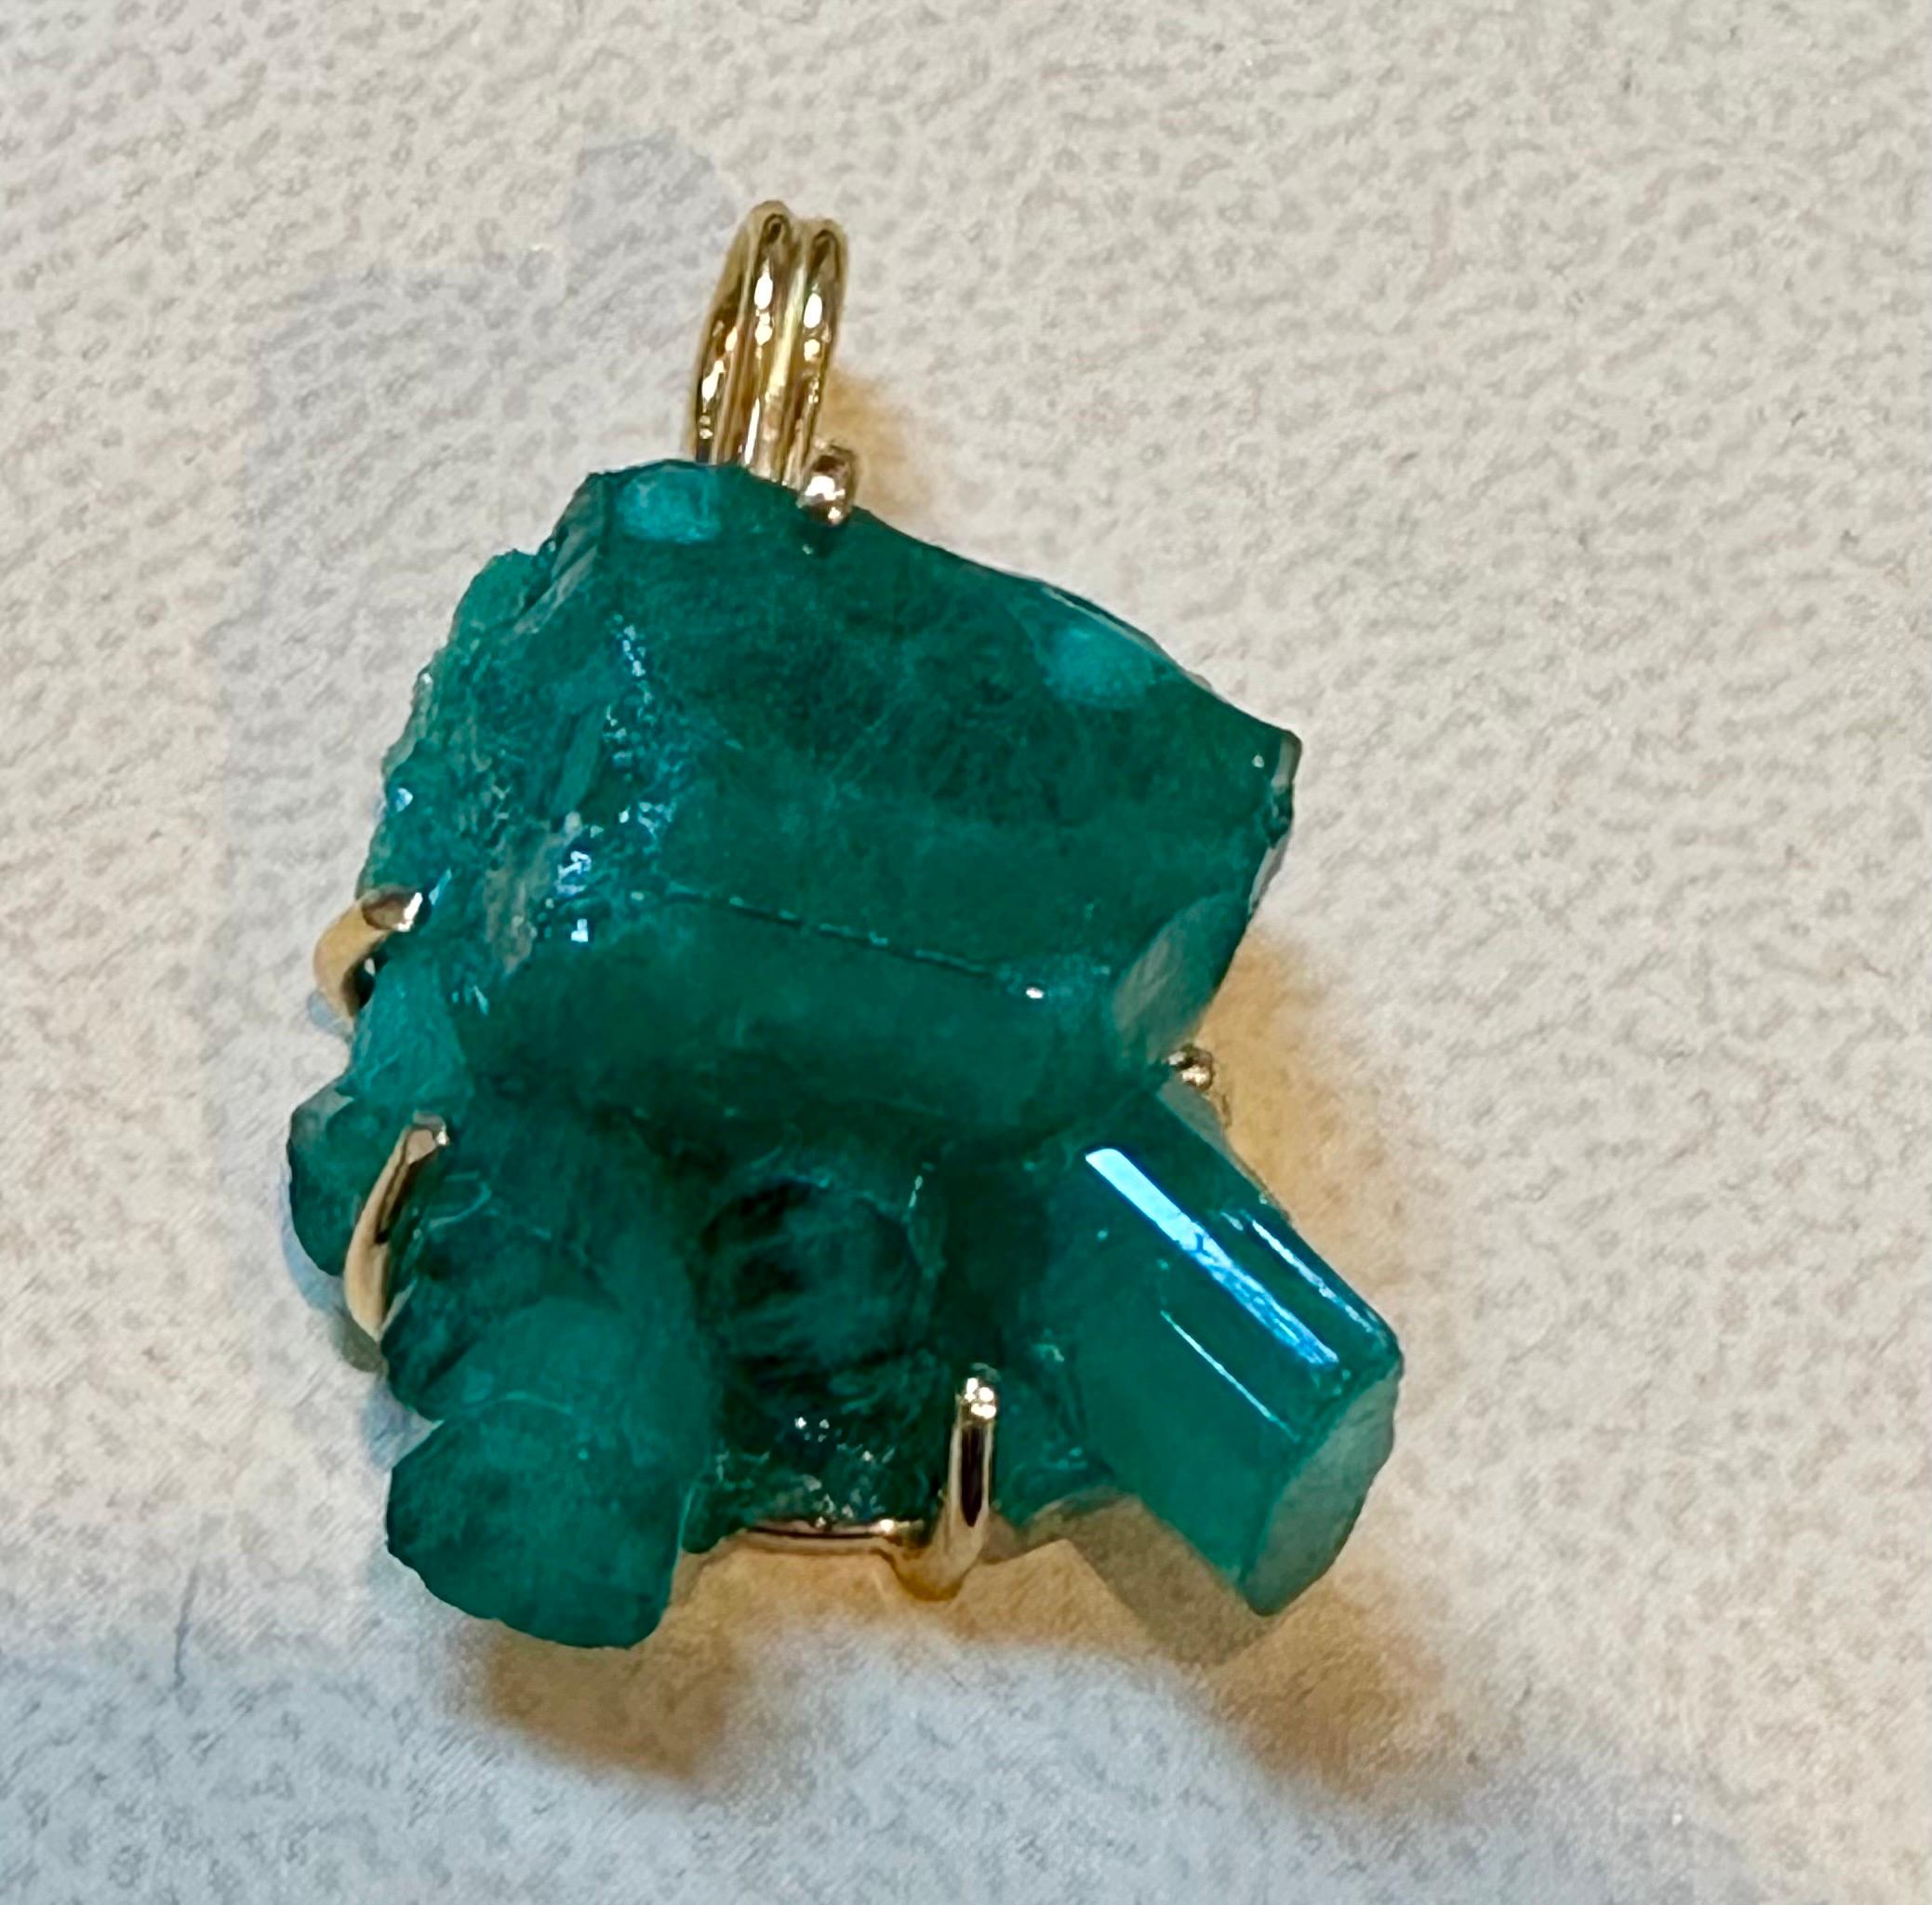 25 Carat Colombian Emerald Rough Pendent/Necklace 18 Karat Gold with 18 KG Chain For Sale 4